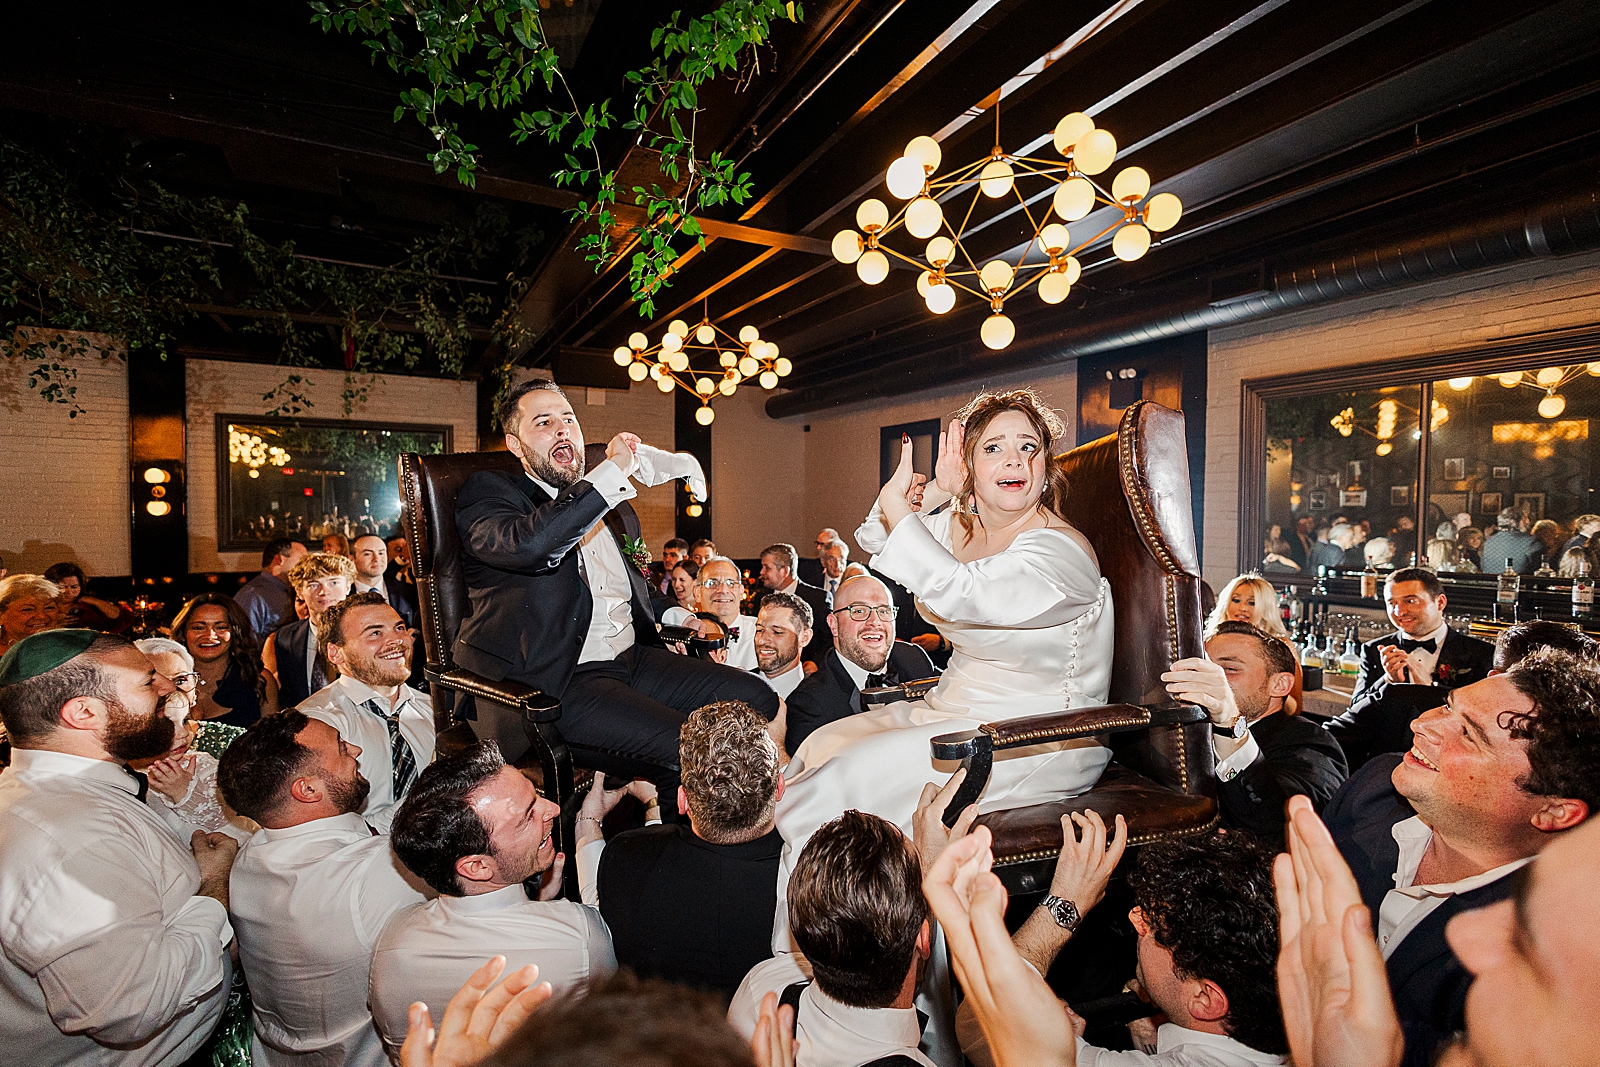 Shot of the Bride and Groom being lifted in chairs by their friends and family during the Hora. 